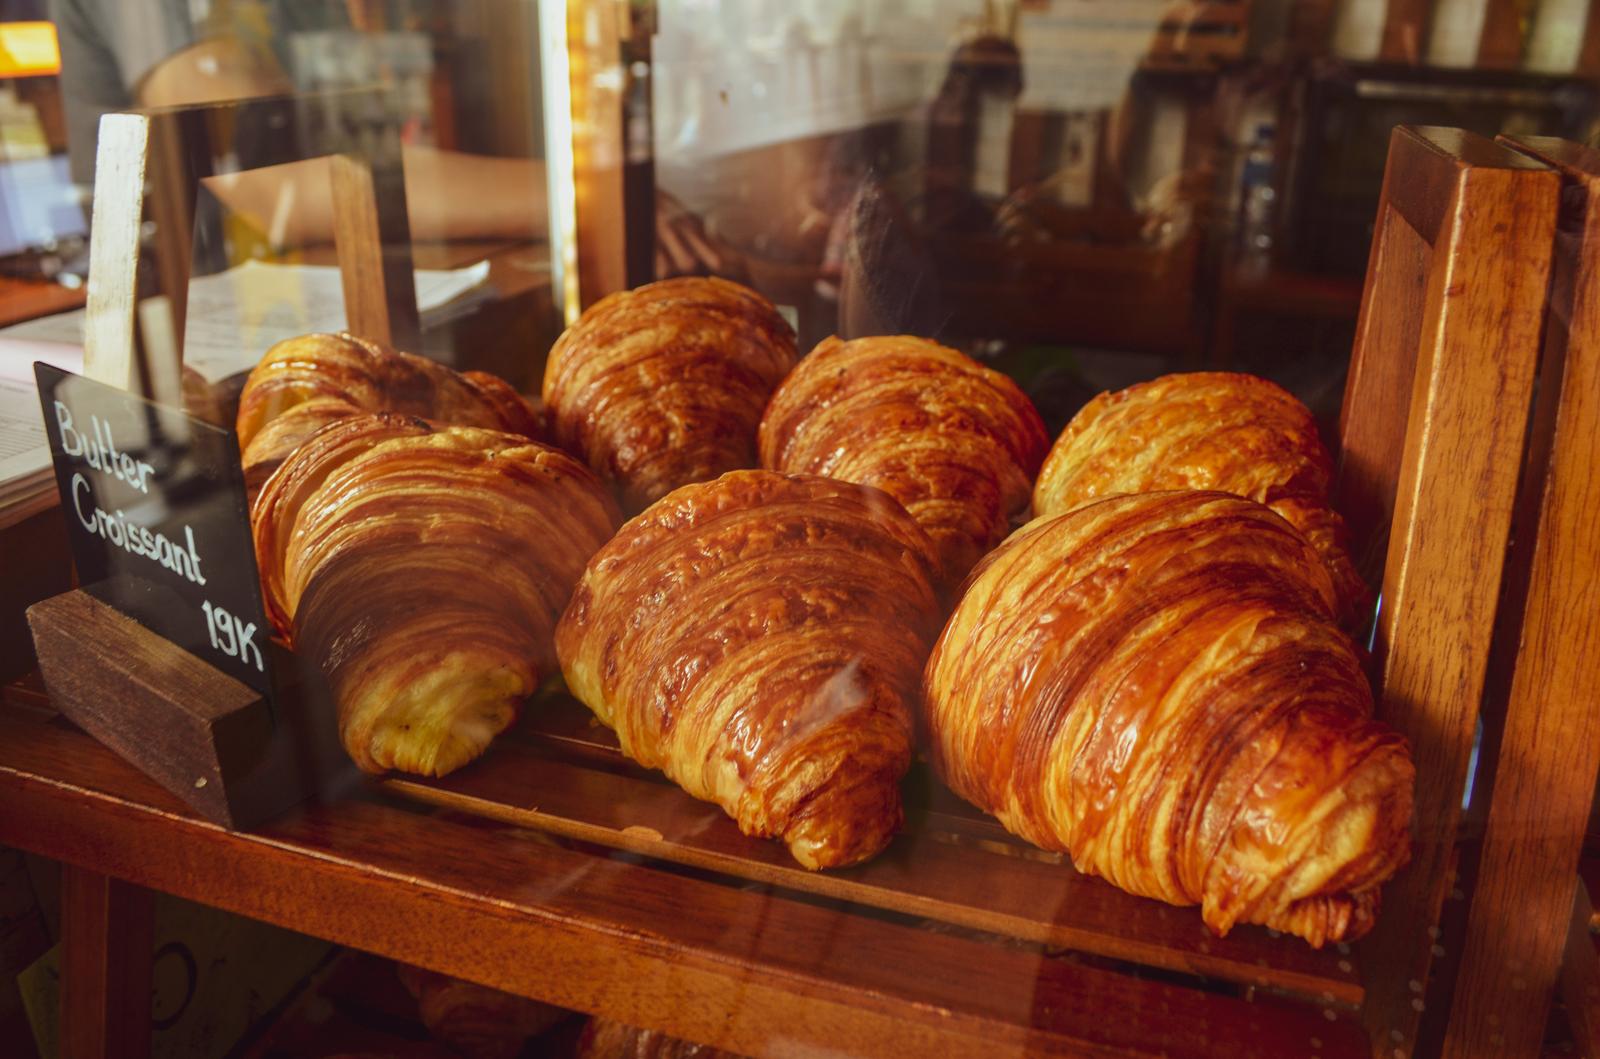 You got: French Croissant! Travel to All the World Capitals and We’ll Reveal Your Ultimate Comfort Food